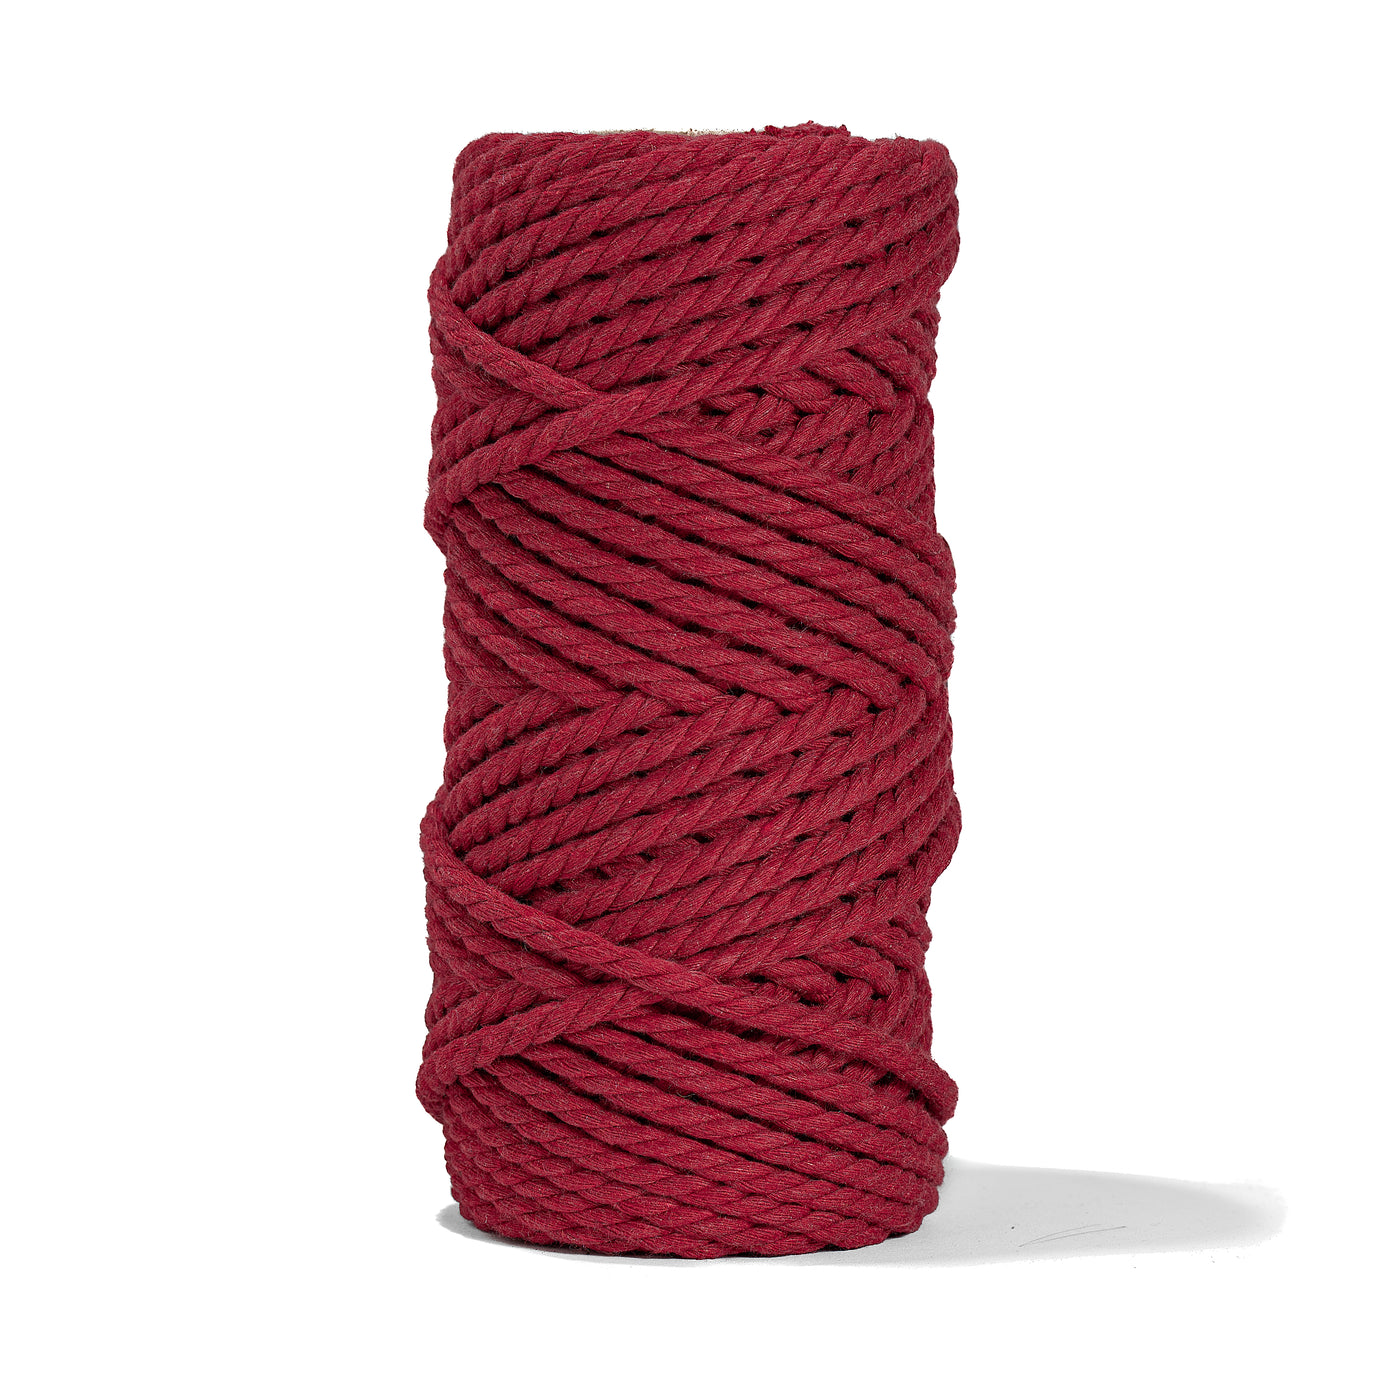 COTTON ROPE ZERO WASTE 5 MM - 3 PLY - BERRY RED COLOR